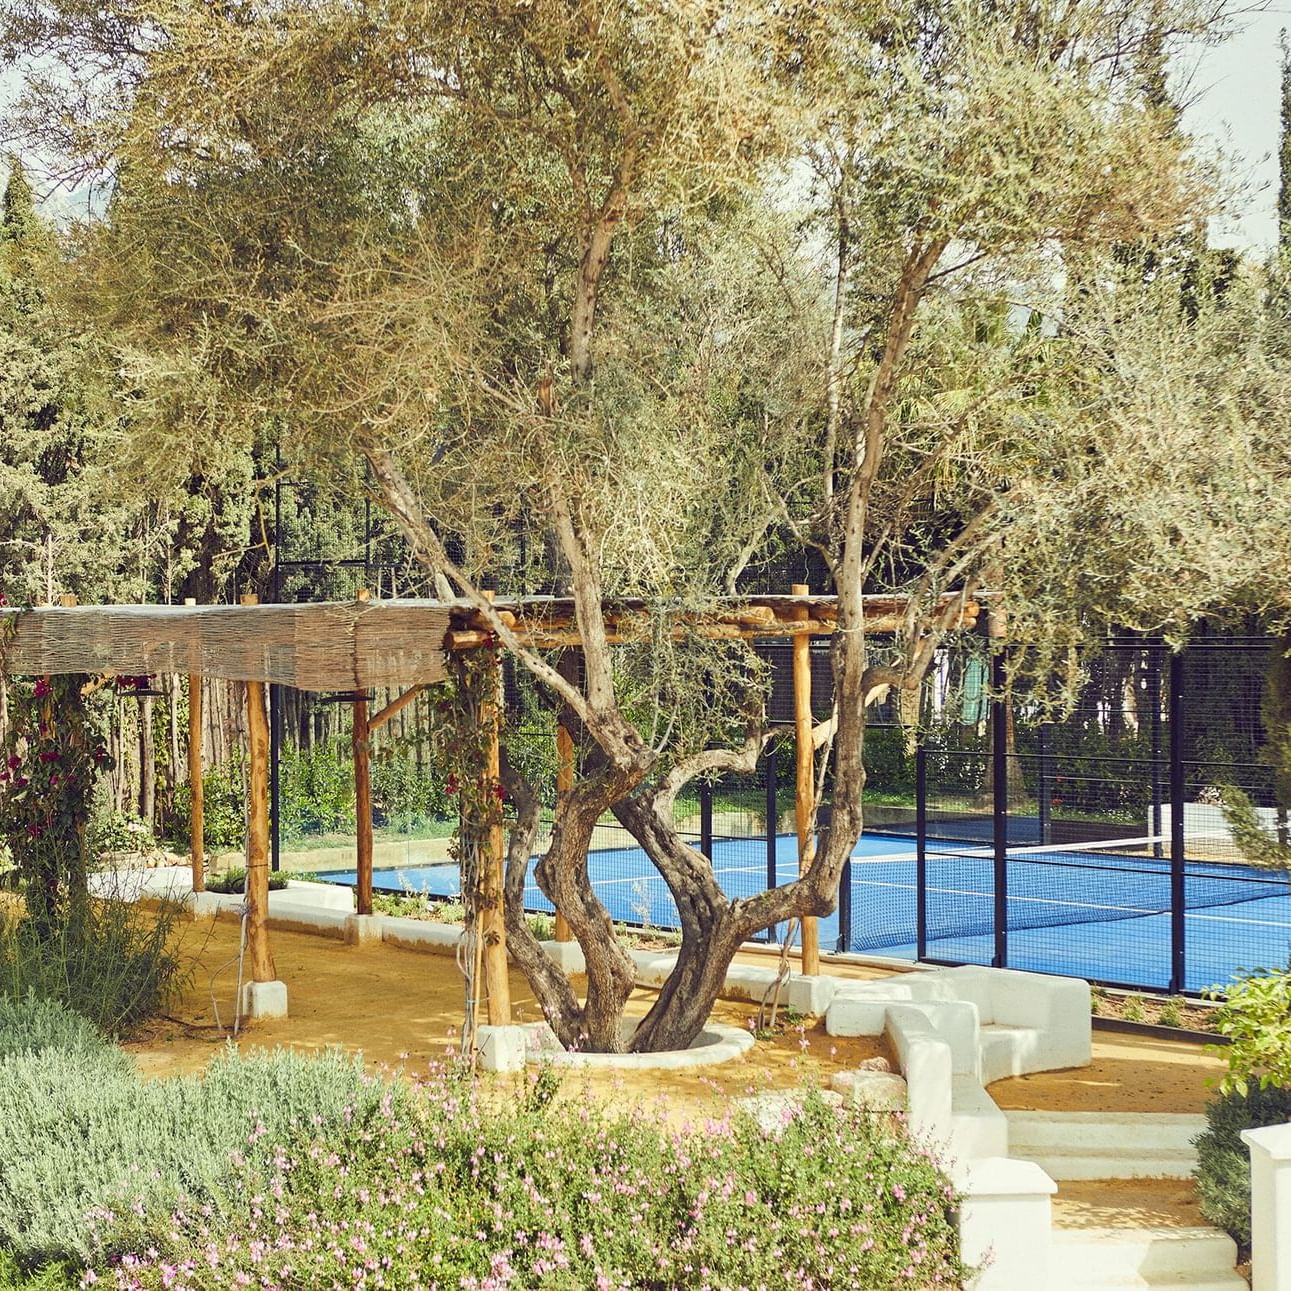 paddel court at the marbella club hotel